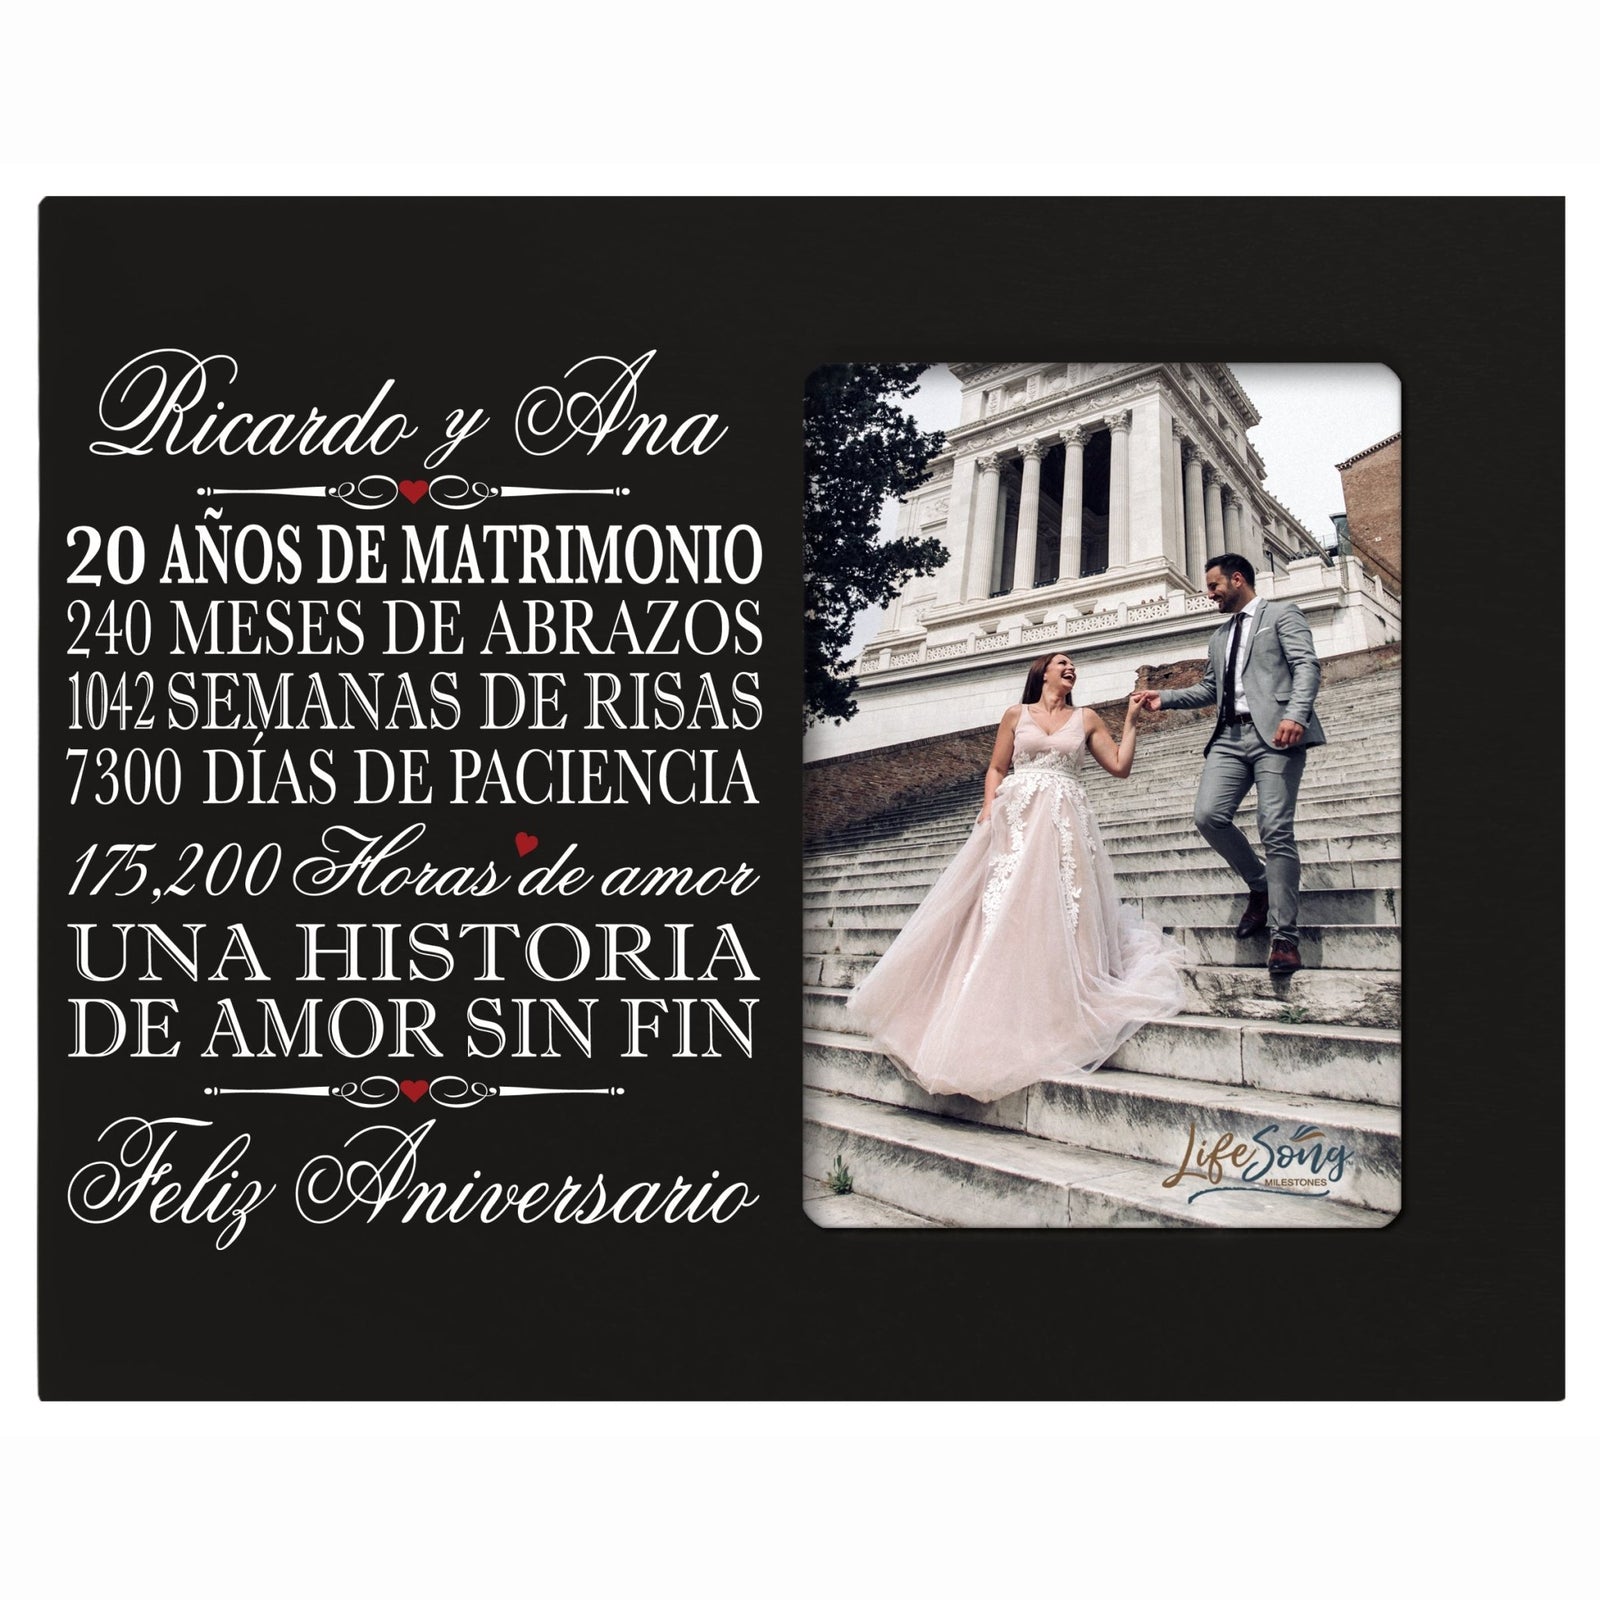 Personalized Anniversary Frames with Spanish Verse - 20th Anniversary - LifeSong Milestones